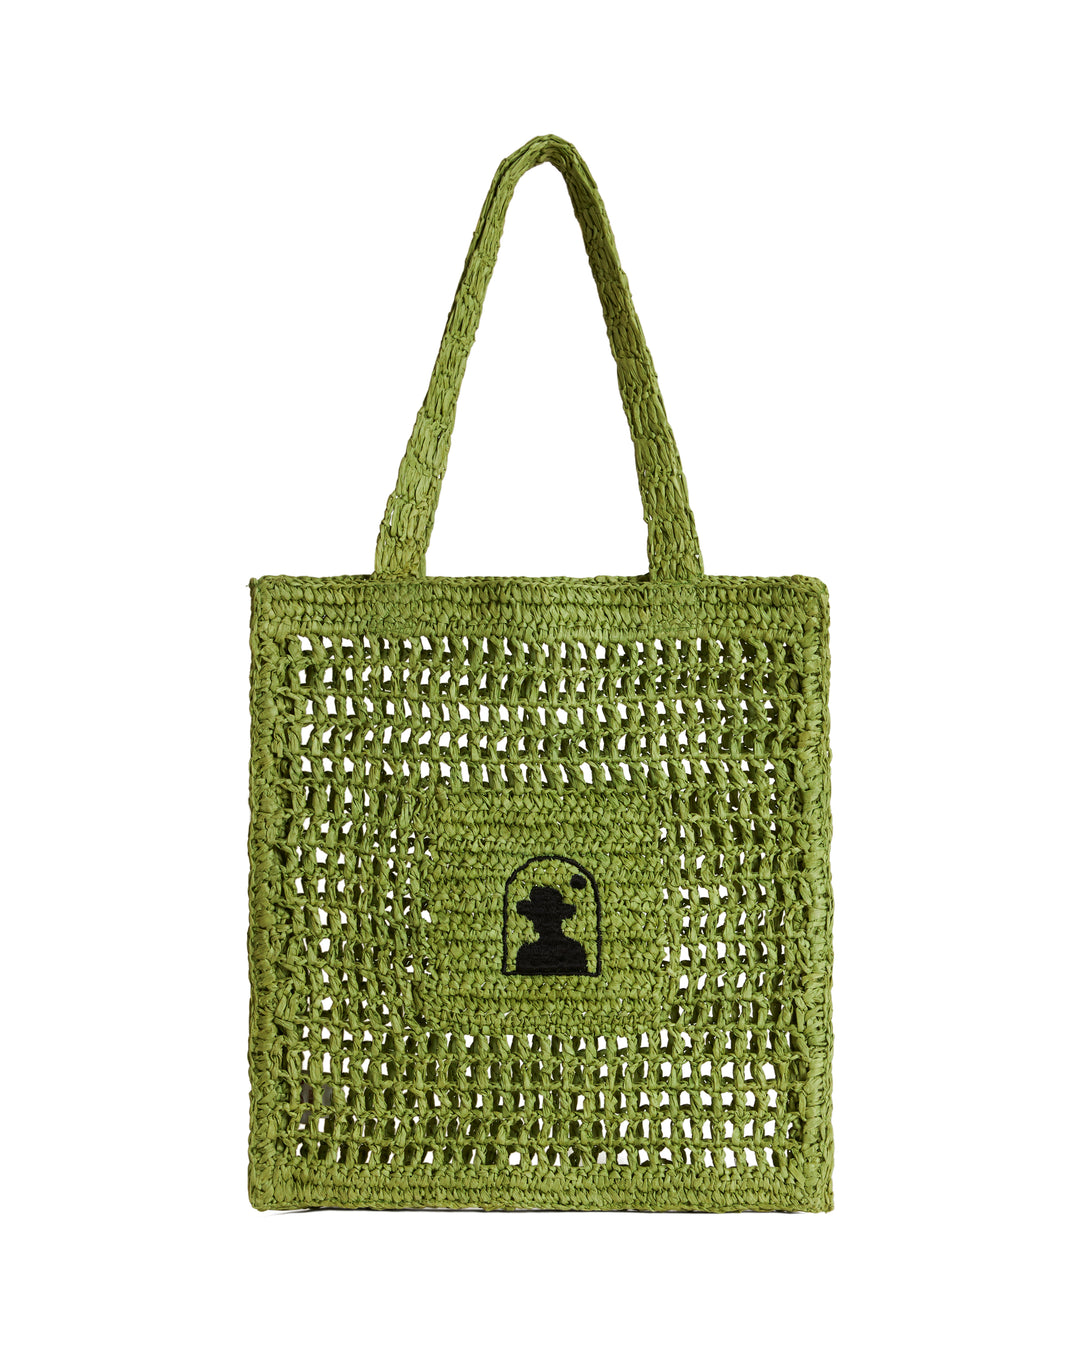 The Amabile Rafia Bag - Kaffir by Dandy Del Mar, with a black padlock design in the center, isolated on a white background.